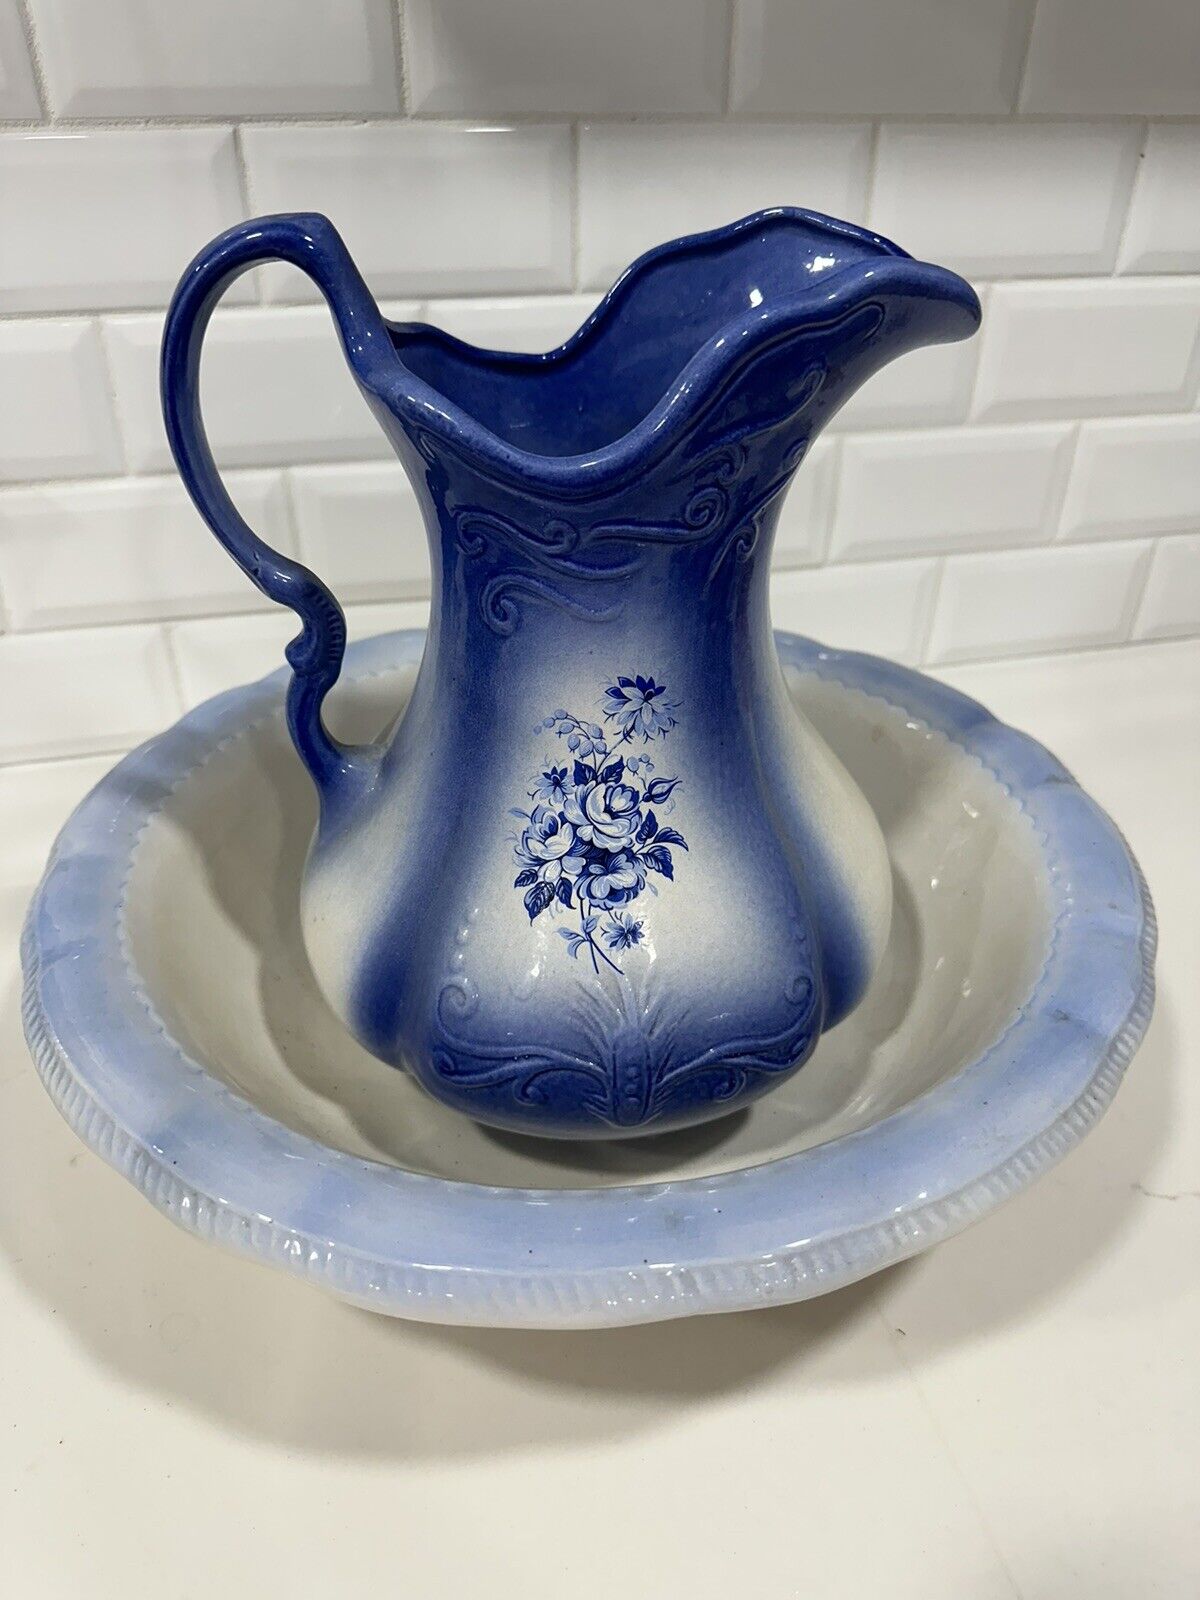 Ironstone USA Wash Basin And Pitcher Antique Blue And White With Floral Design